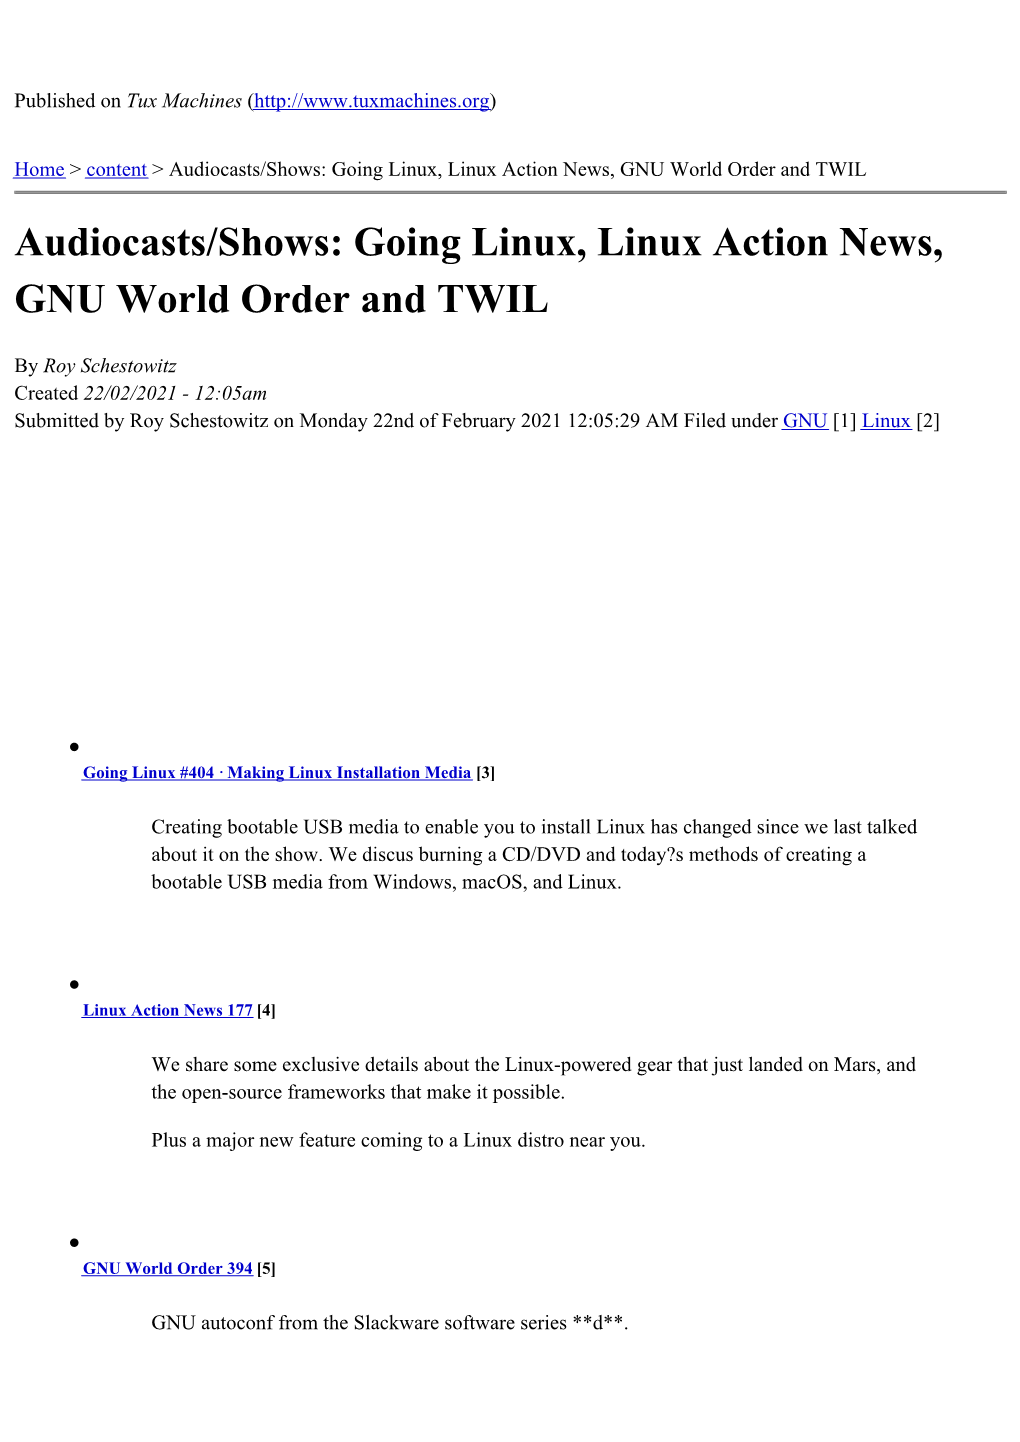 Going Linux, Linux Action News, GNU World Order and TWIL